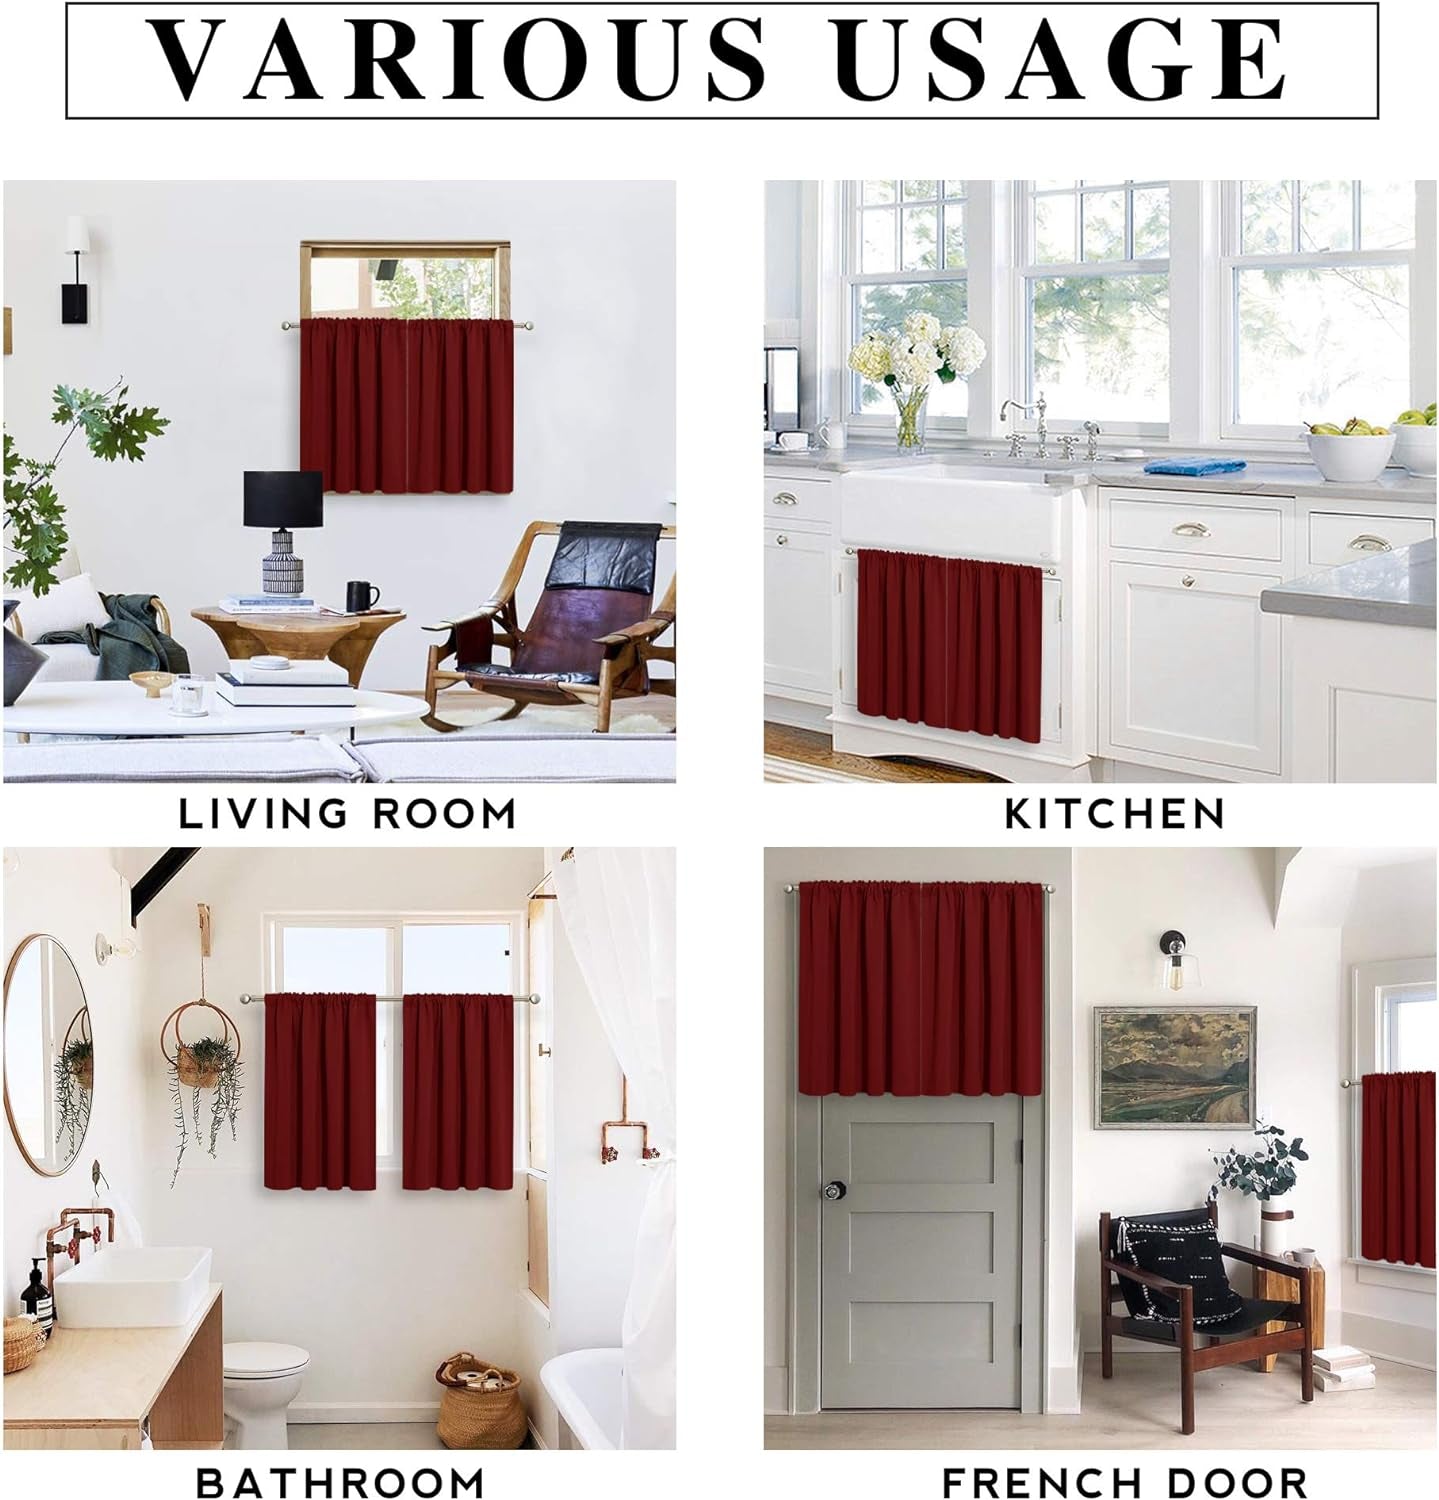 RYB HOME Blackout Curtains for Half Window Kitchen Curtains, Thermal Insulated Curtain Panels for Bedroom/Living Room, 42 X 36 Inches Each Panel, Burgundy Red, 2 Panels  RYB HOME   